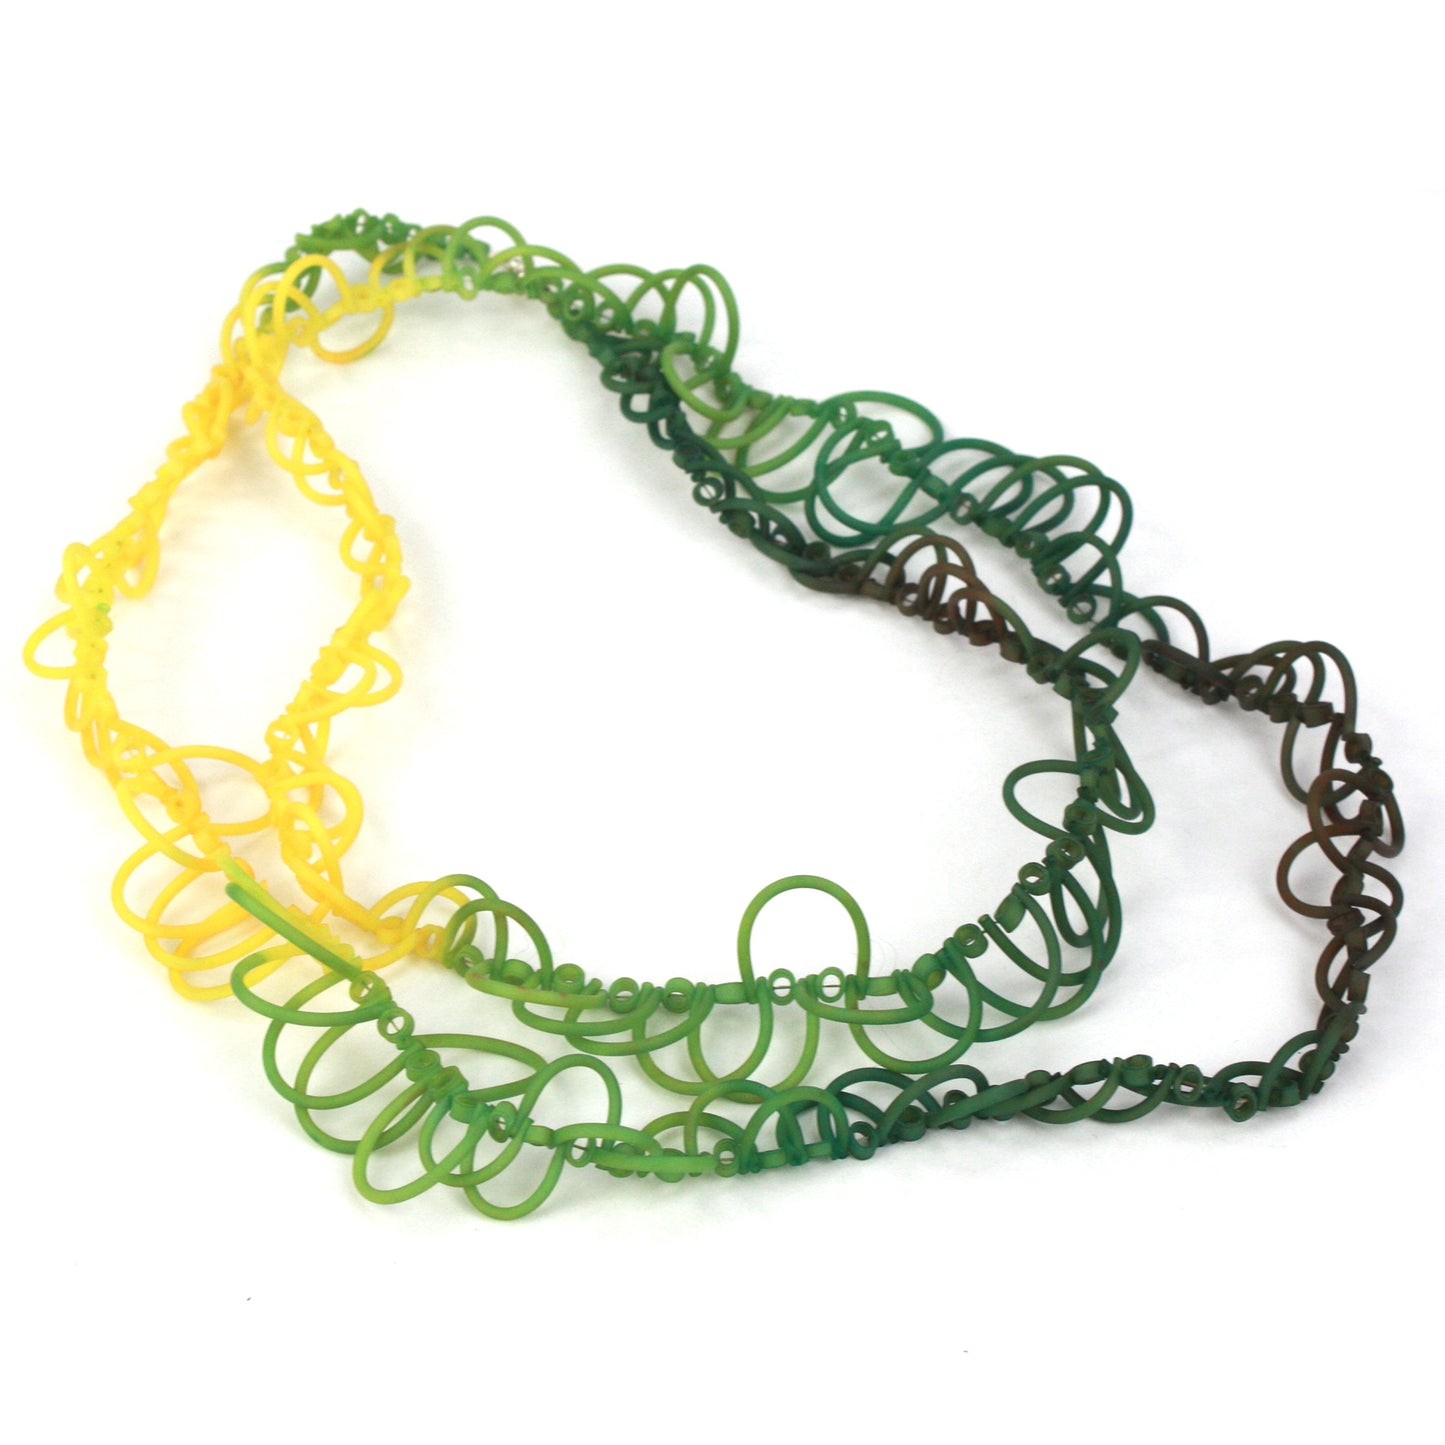 Loops necklace - Green and yellow